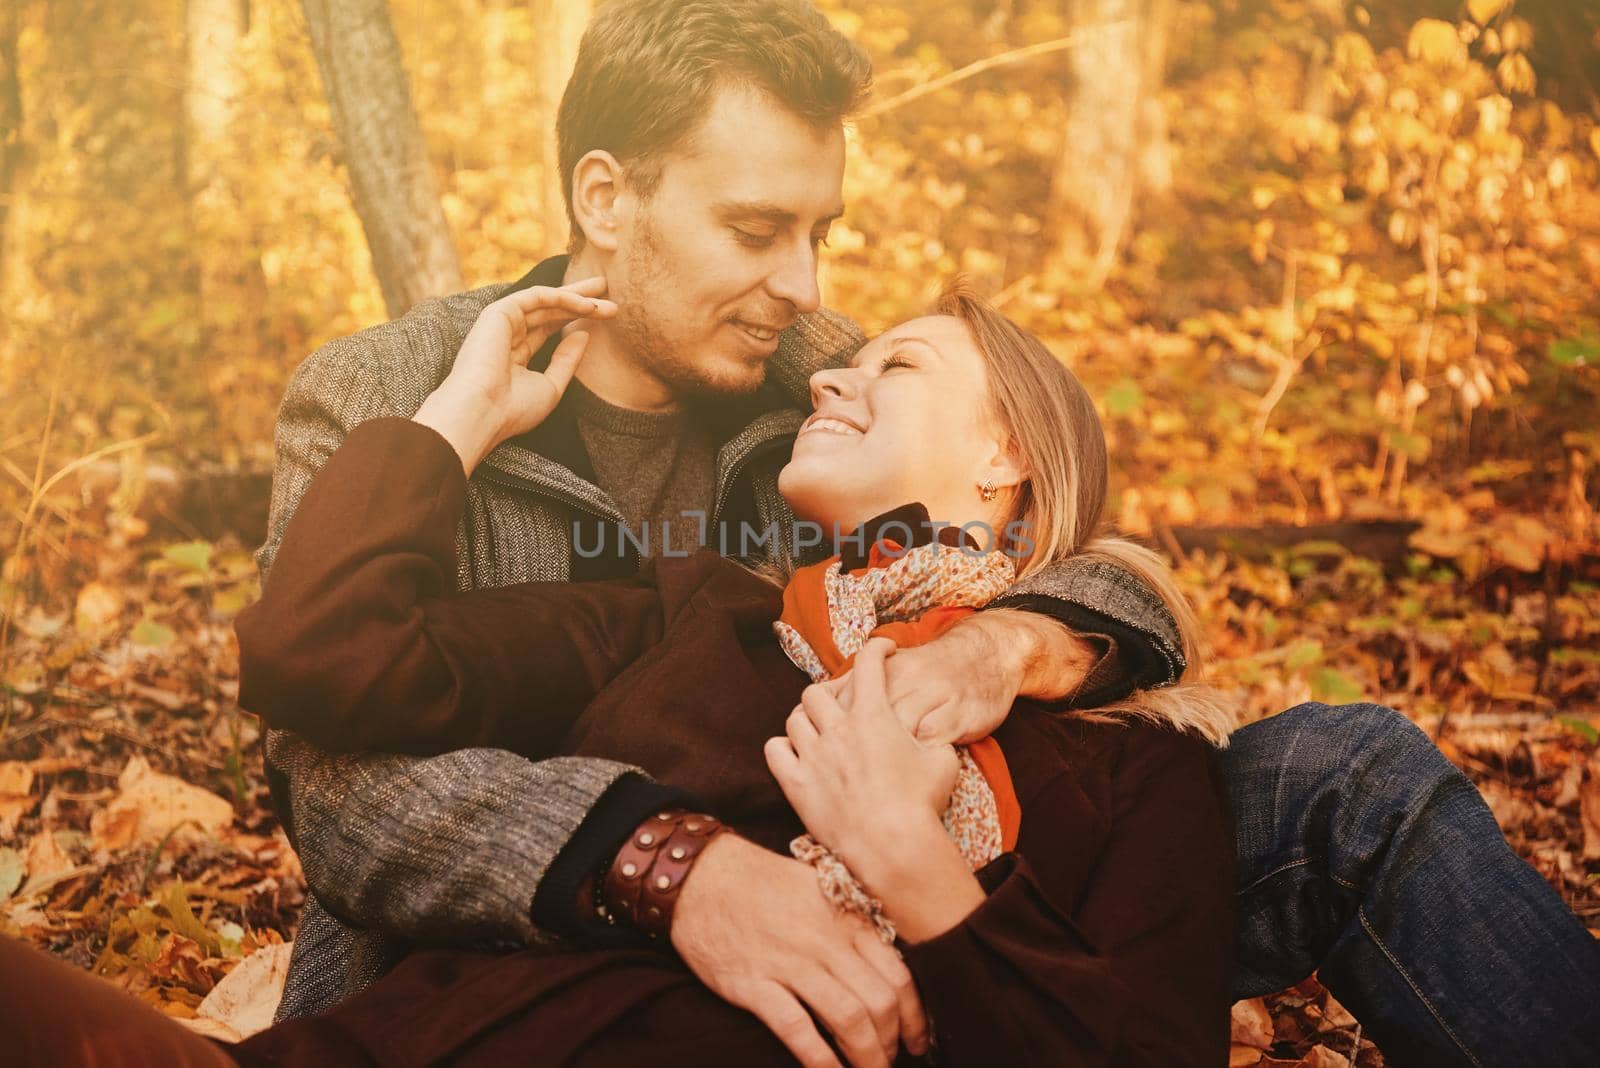 Young loving couple rests in autumn park, man embraces a woman. Image with sunlight effect.